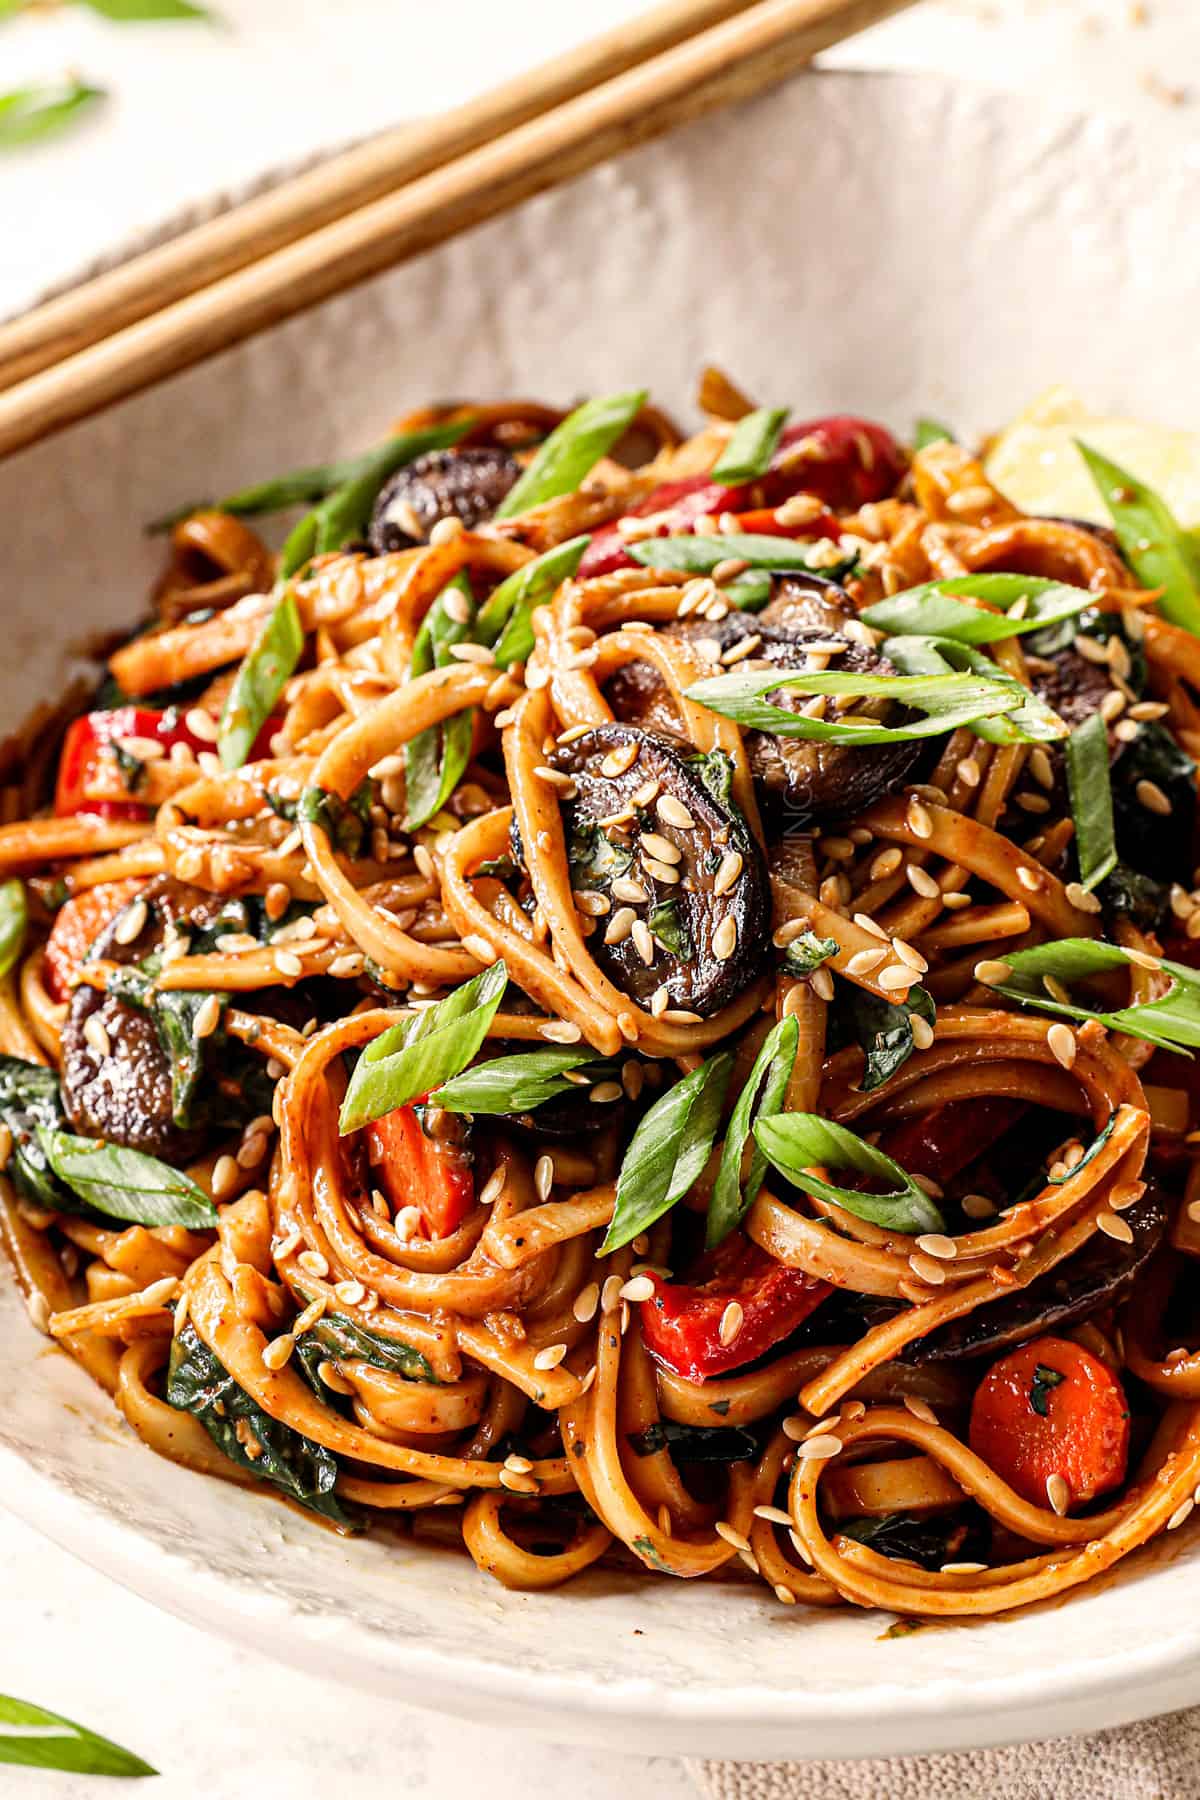 Udon Noodles with Gochujang Sauce and Stir Fried Veggies